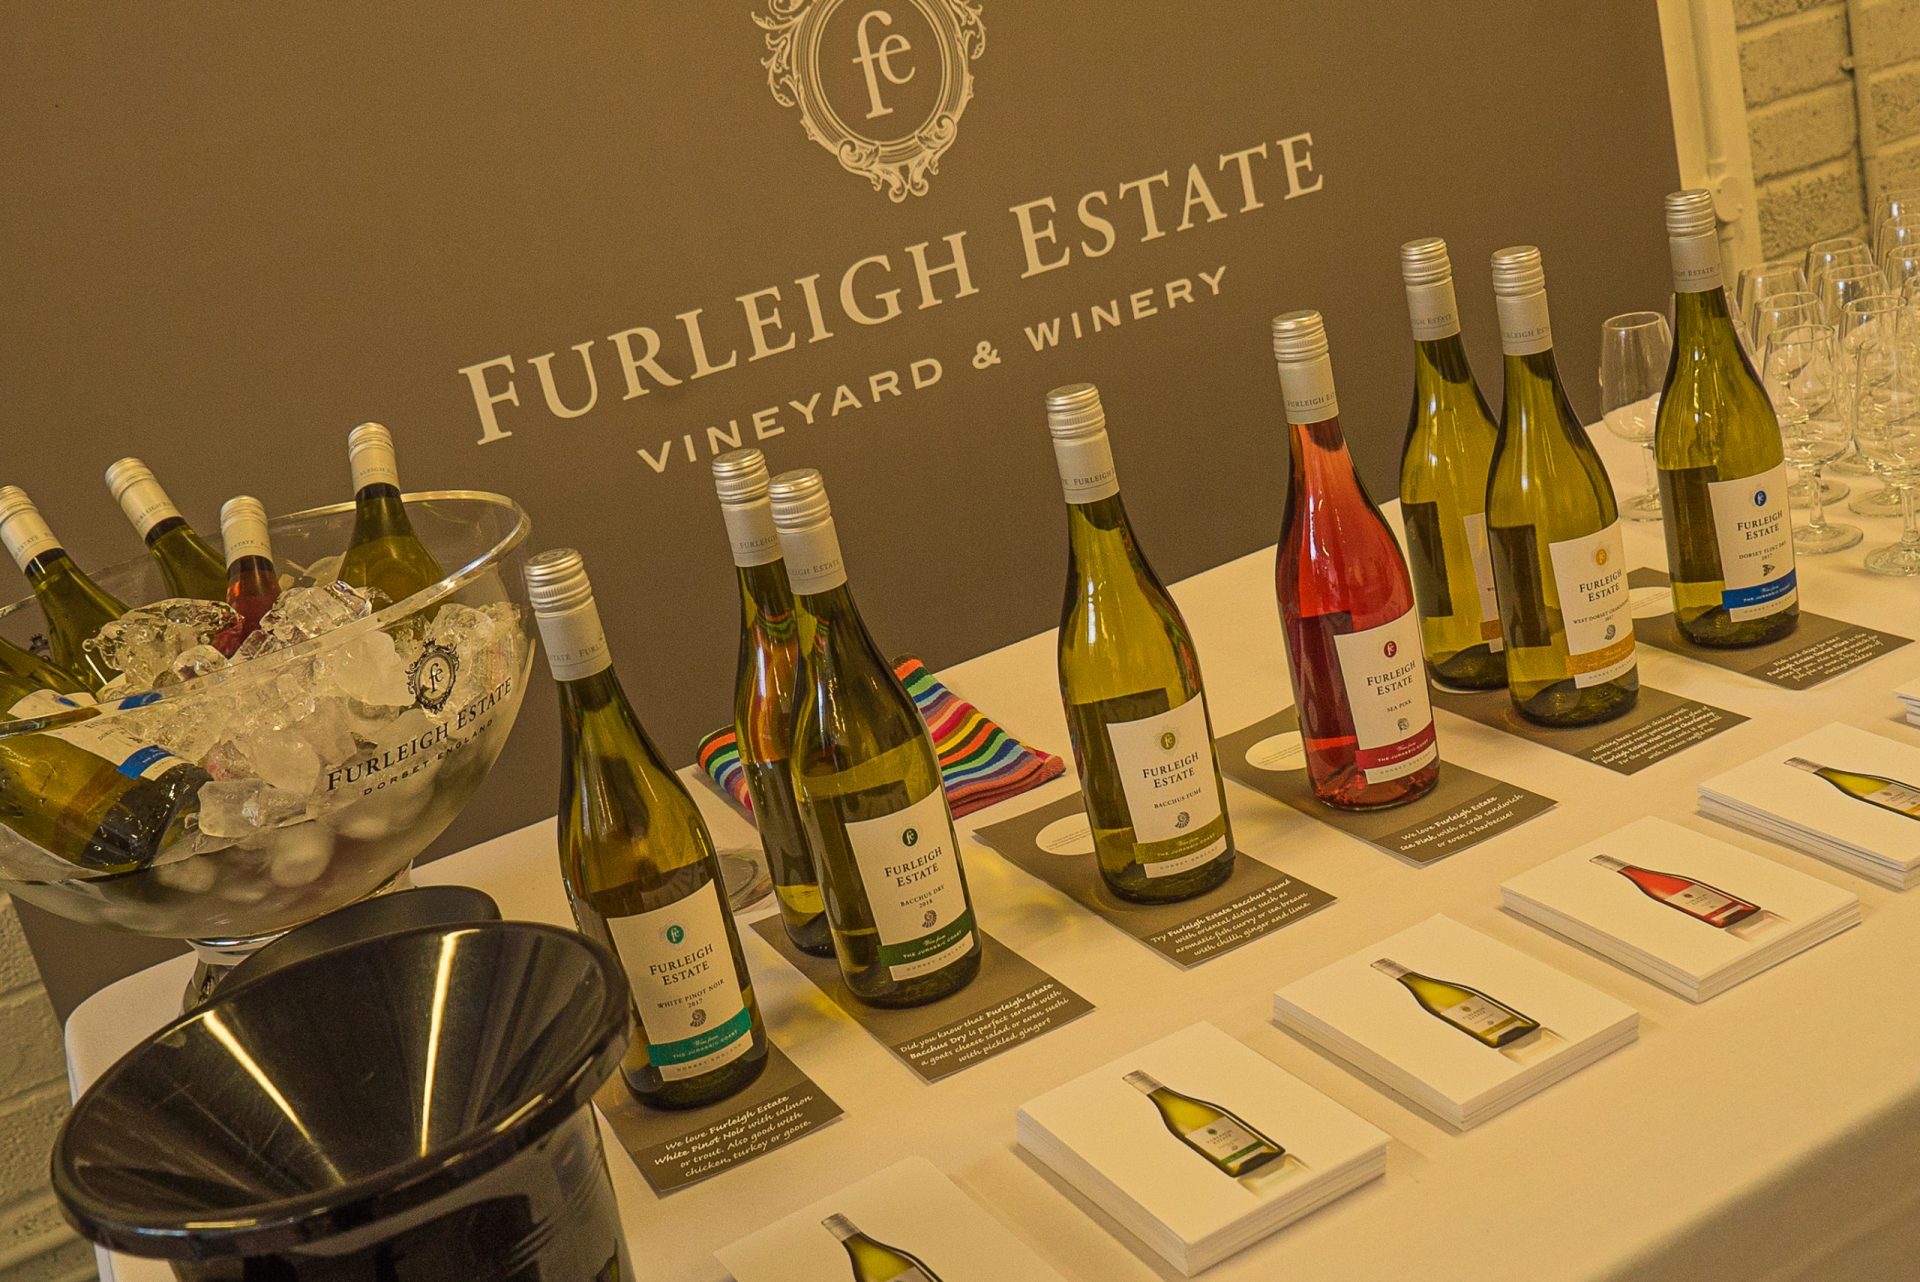 A wine tasting table set up with various bottles of Furleigh Estate wines, informational pamphlets about the wines, and other assorted tasting supplies.